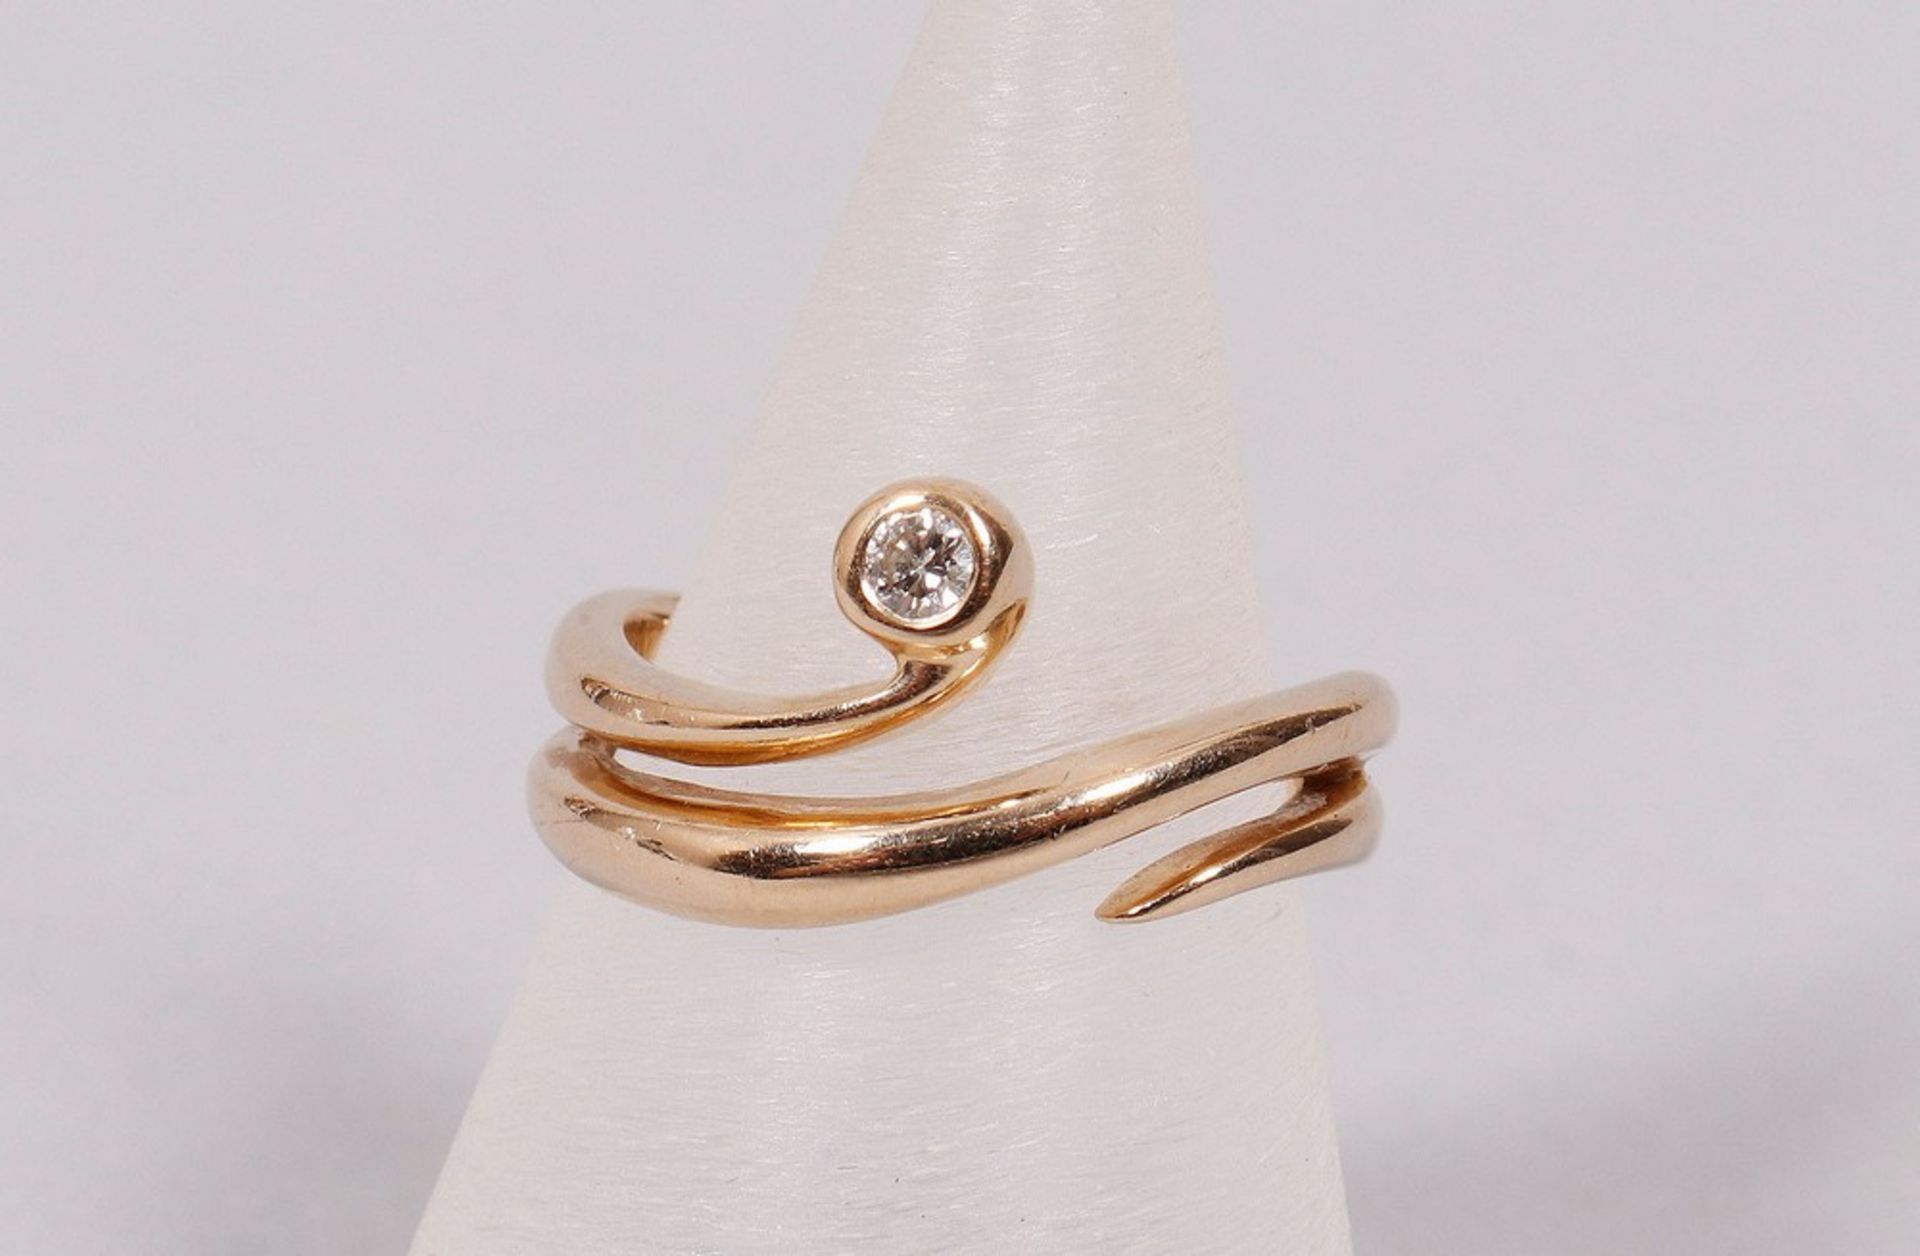 Modern ring in the style of a snake ring, 585 gold, 1 brilliant - Image 2 of 3